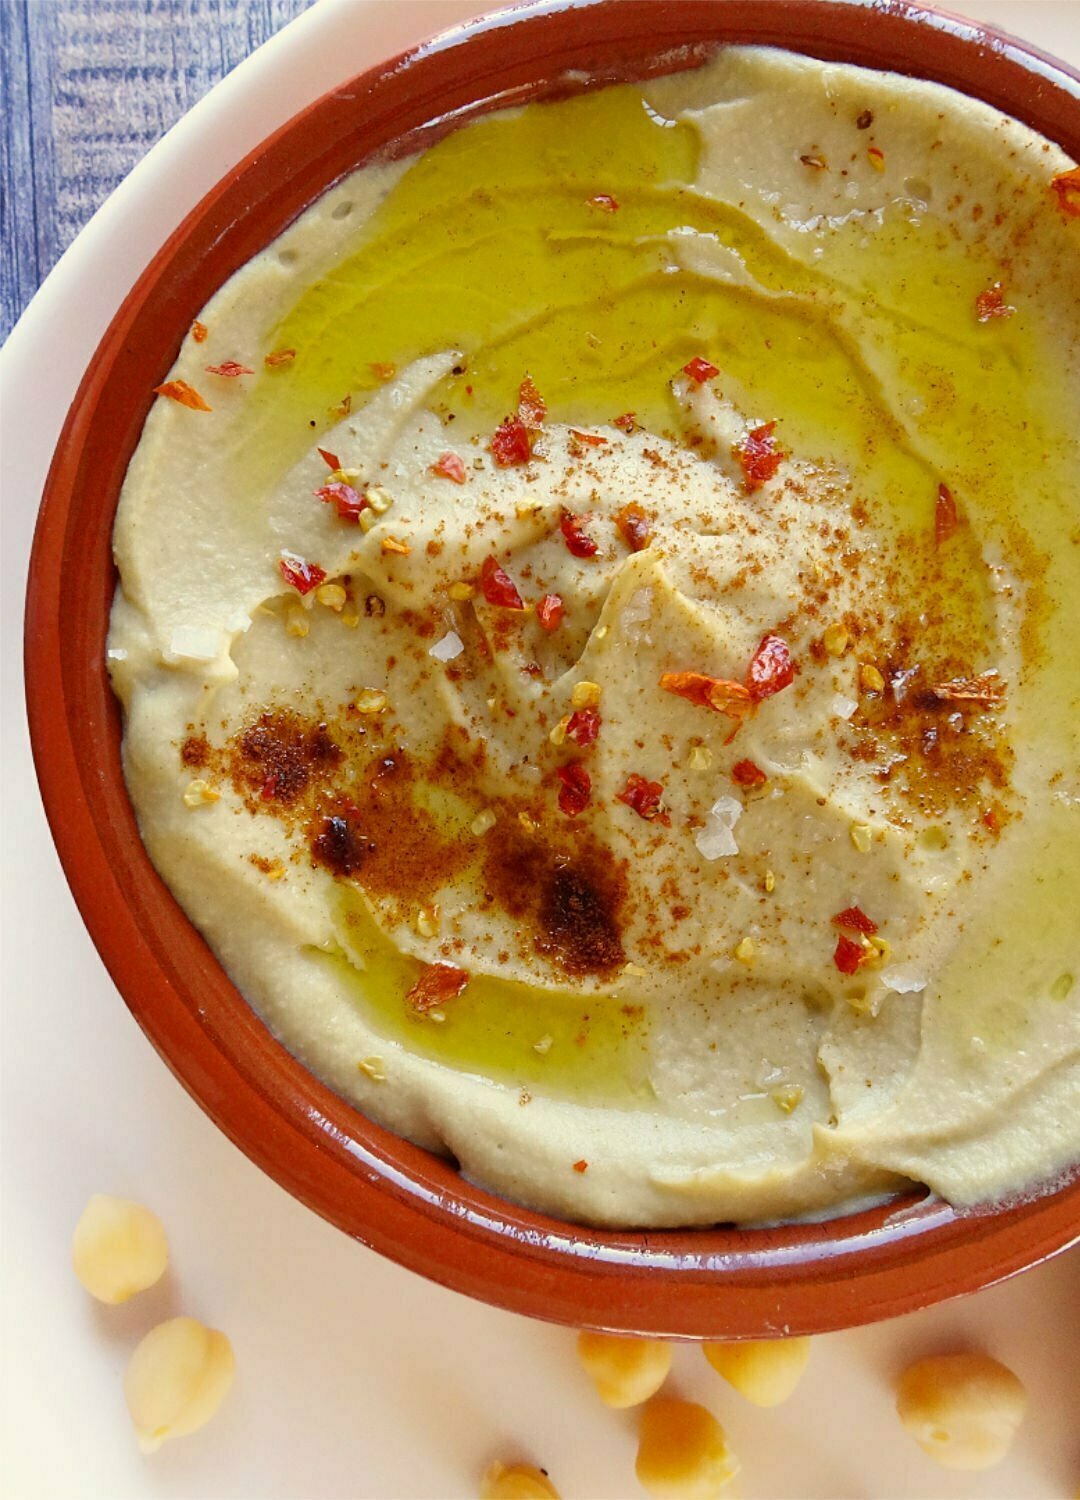 A earthenware dish sits filled with Mediterranean hummus